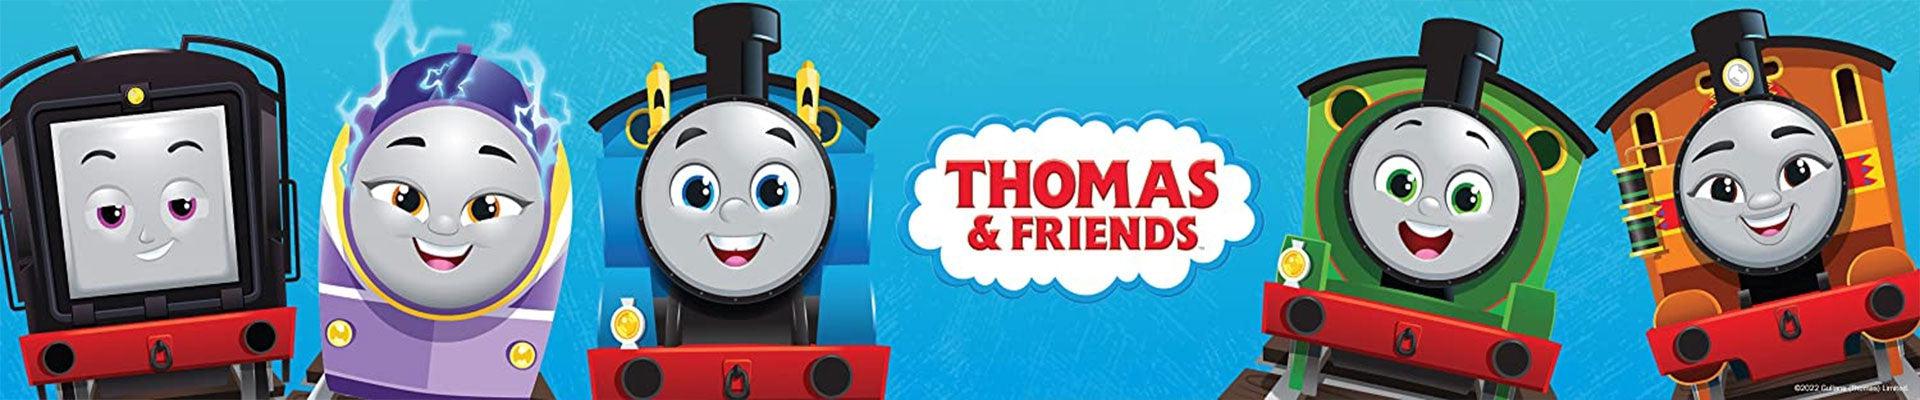 Thomas & Friends Store at Legacy Toys